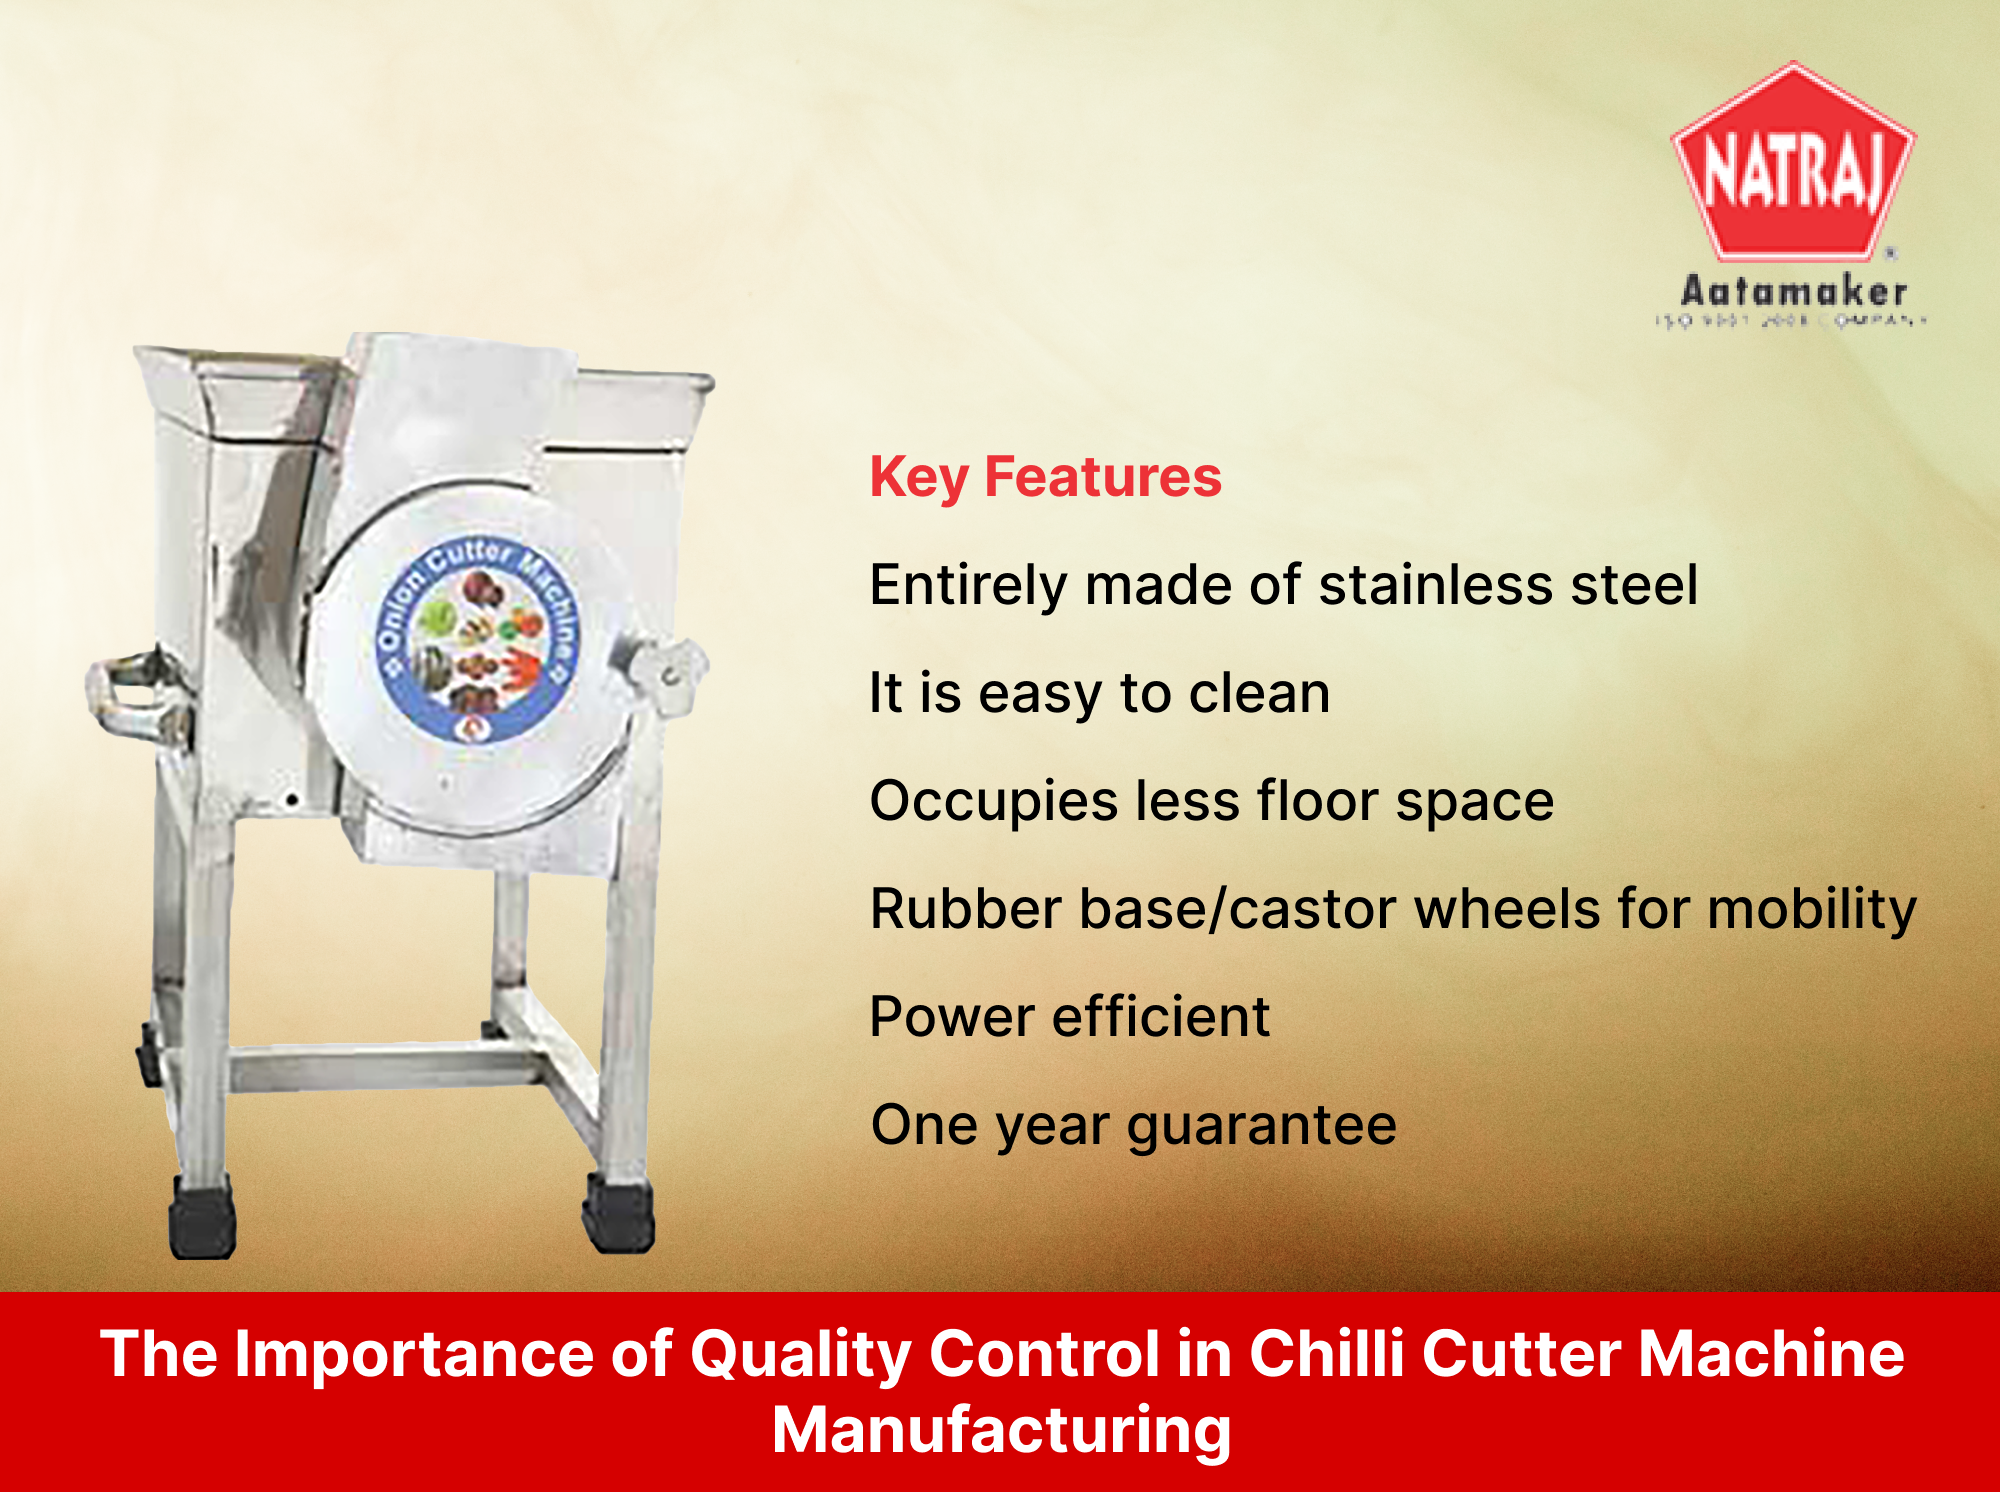 The Importance of Quality Control in Chilli Cutter Machine Manufacturing